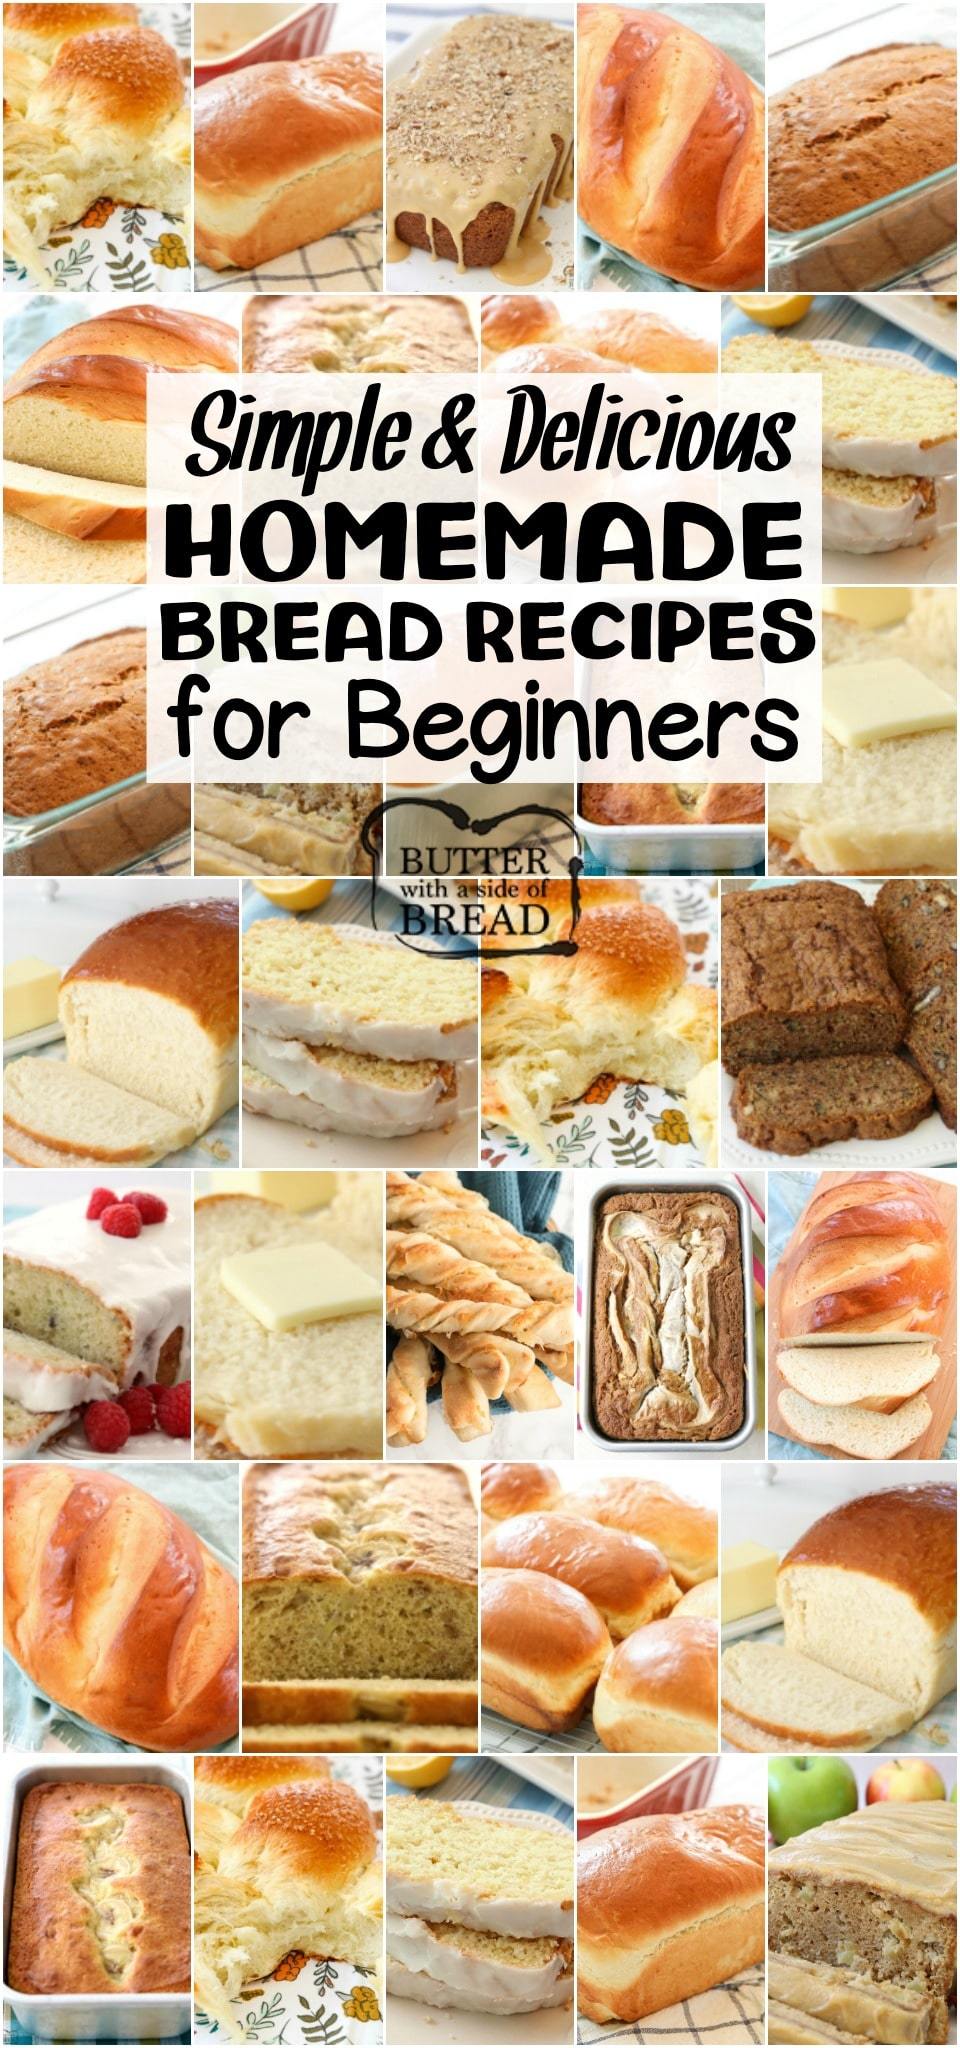 Easy Homemade Bread Recipes for Beginners~ from sweet to savory, quick breads to yeast breads, you're going to love this bread! Most popular easy bread recipes we can't get enough of. If you want to make bread, START HERE! #bread #baking #homemade #breadrecipe #recipe #homemadebread #howtomakebread from BUTTER WITH A SIDE OF BREAD